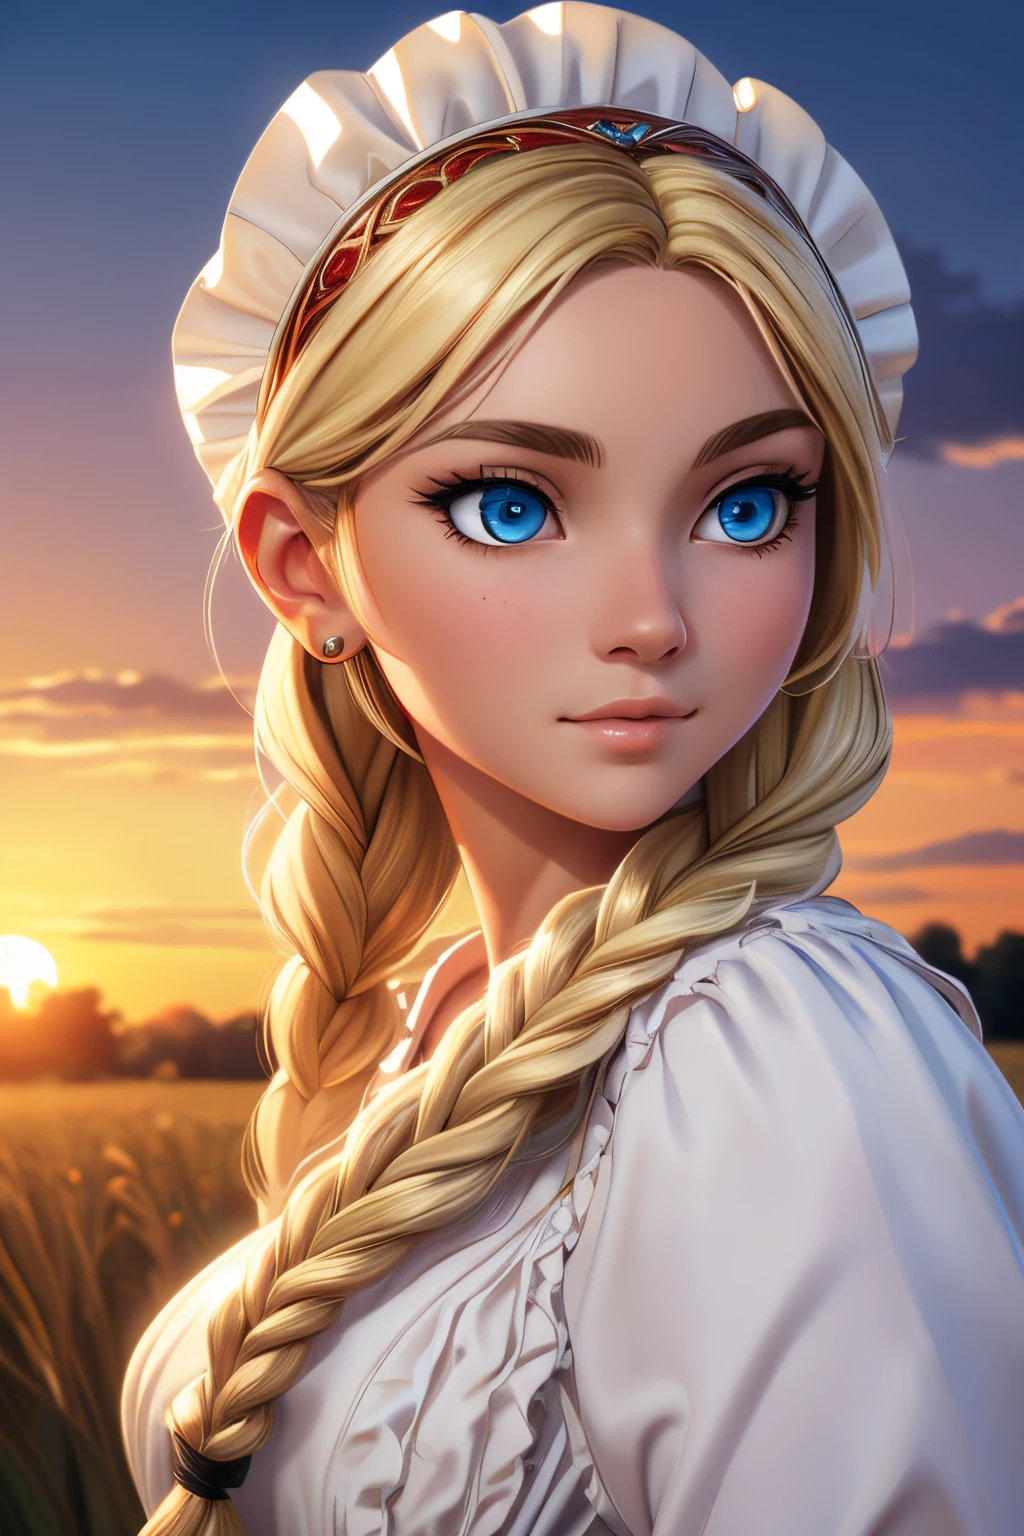 ((ultra quality)), ((tmasterpiece)), beautiful young Slavic girl, ((blonde woman, hairlong, Long braid)), Beautiful cute face, beautiful female lips, charming beauty, ((Kind expression on his face)), is looking at the camera, slightly closed eyes, ((Skin color: white)), Body glare, ((detailed beautiful female eyes)), ((big blue eyes)), beautiful female hands, ((perfect female figure)), ideal female body shapes, Beautiful waist, nice feet, big thighs, Beautiful butt, ((Subtle and beautiful)), seductively worth it ((closeup face)), ((clothes from Slavic fantasy, White dress with red ornate ruffles, Slavic hoop on the head)) background: field, Beautiful sunset, ((Depth of field)), ((high quality clear image)), ((crisp details)), ((higly detailed)), Realistic, Professional Photo Session, ((Clear Focus)), ((cartoon)), the anime, NSFW